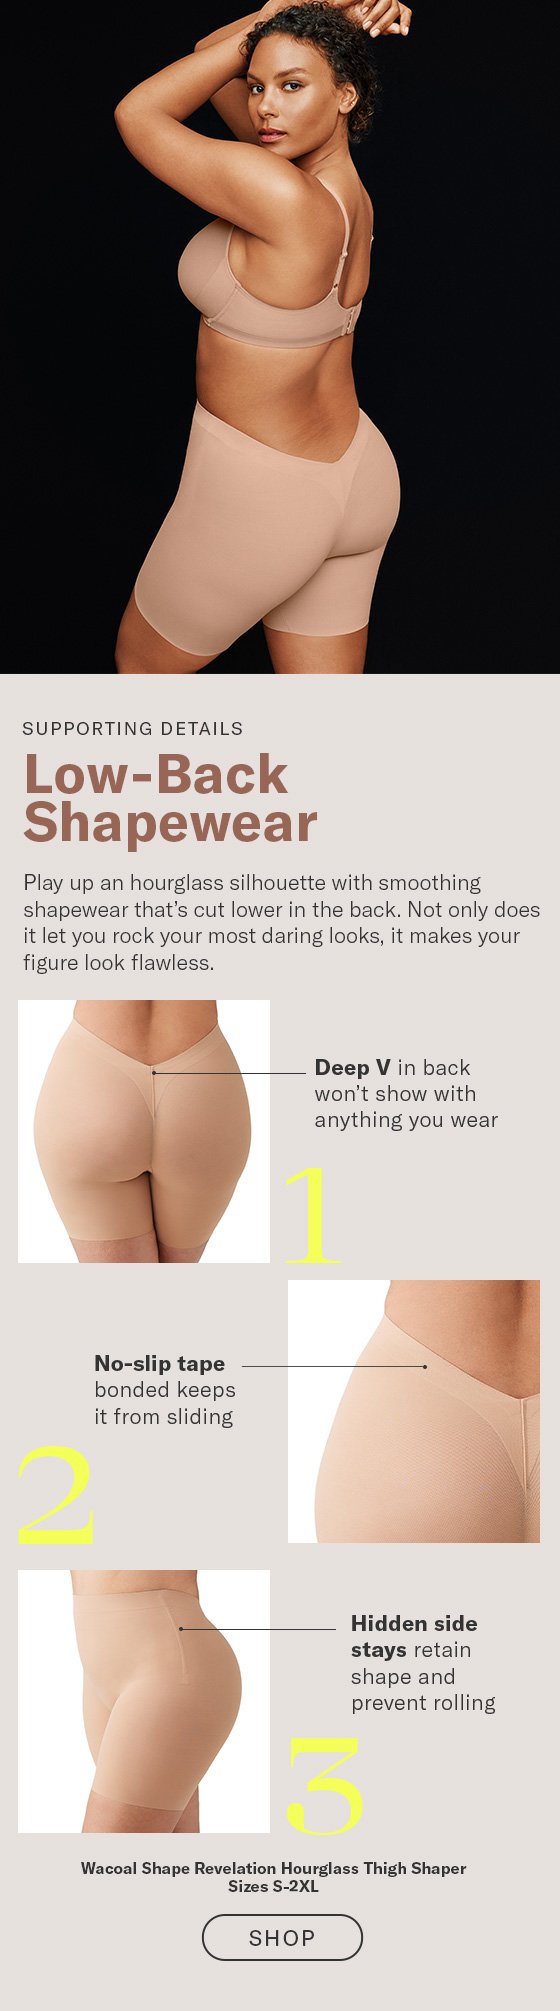 Shapewear Solutions Made For Your Low-Back Wardrobe - Bare Necessities